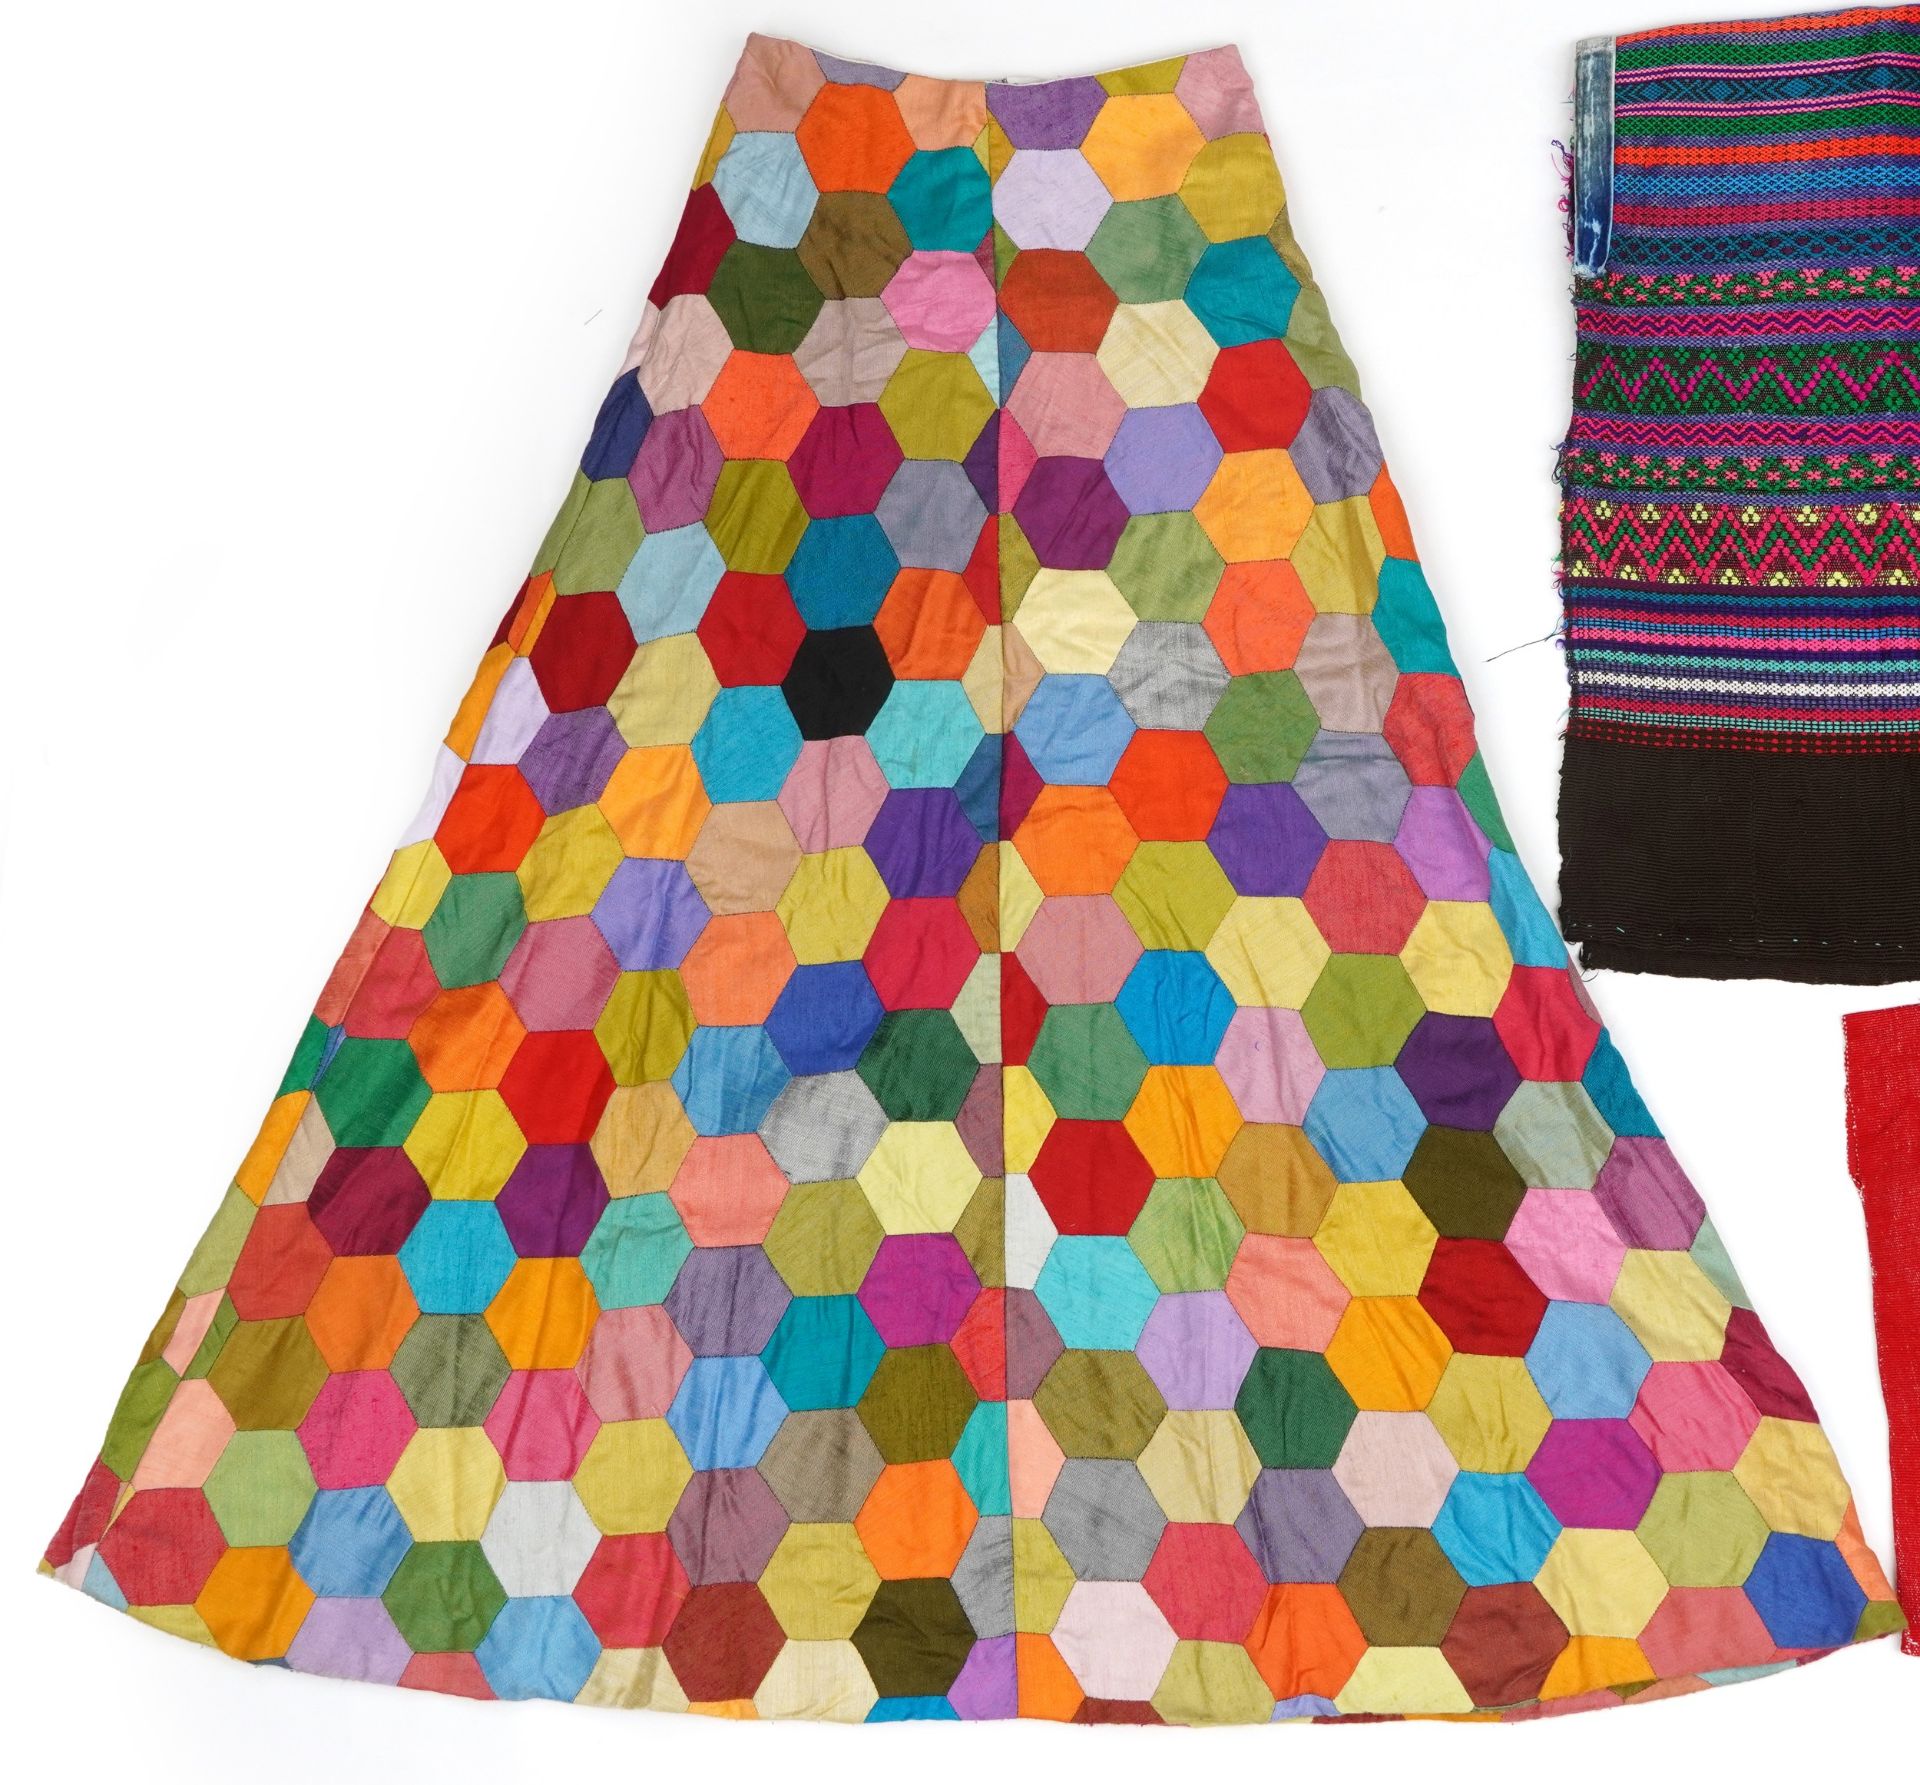 Vintage hexagonal patchwork skirt, patterned Hungarian poncho and Point de Hongrie upholstery - Bild 16 aus 24